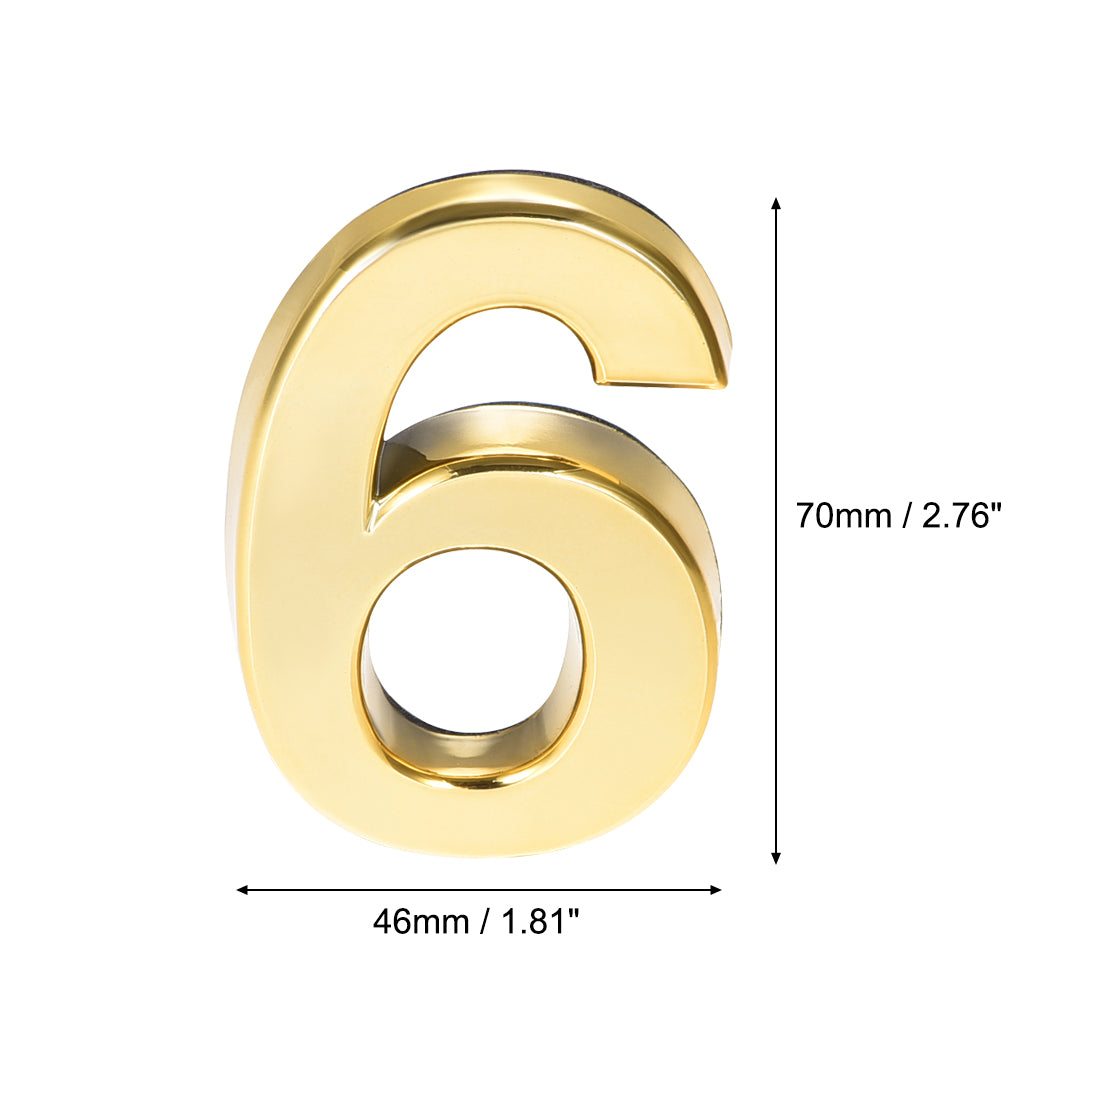 Uxcell Uxcell Self Adhesive House Number 2.76 Inch ABS Plastic Number 2 for House Hotel Mailbox Address Sign Gold Tone